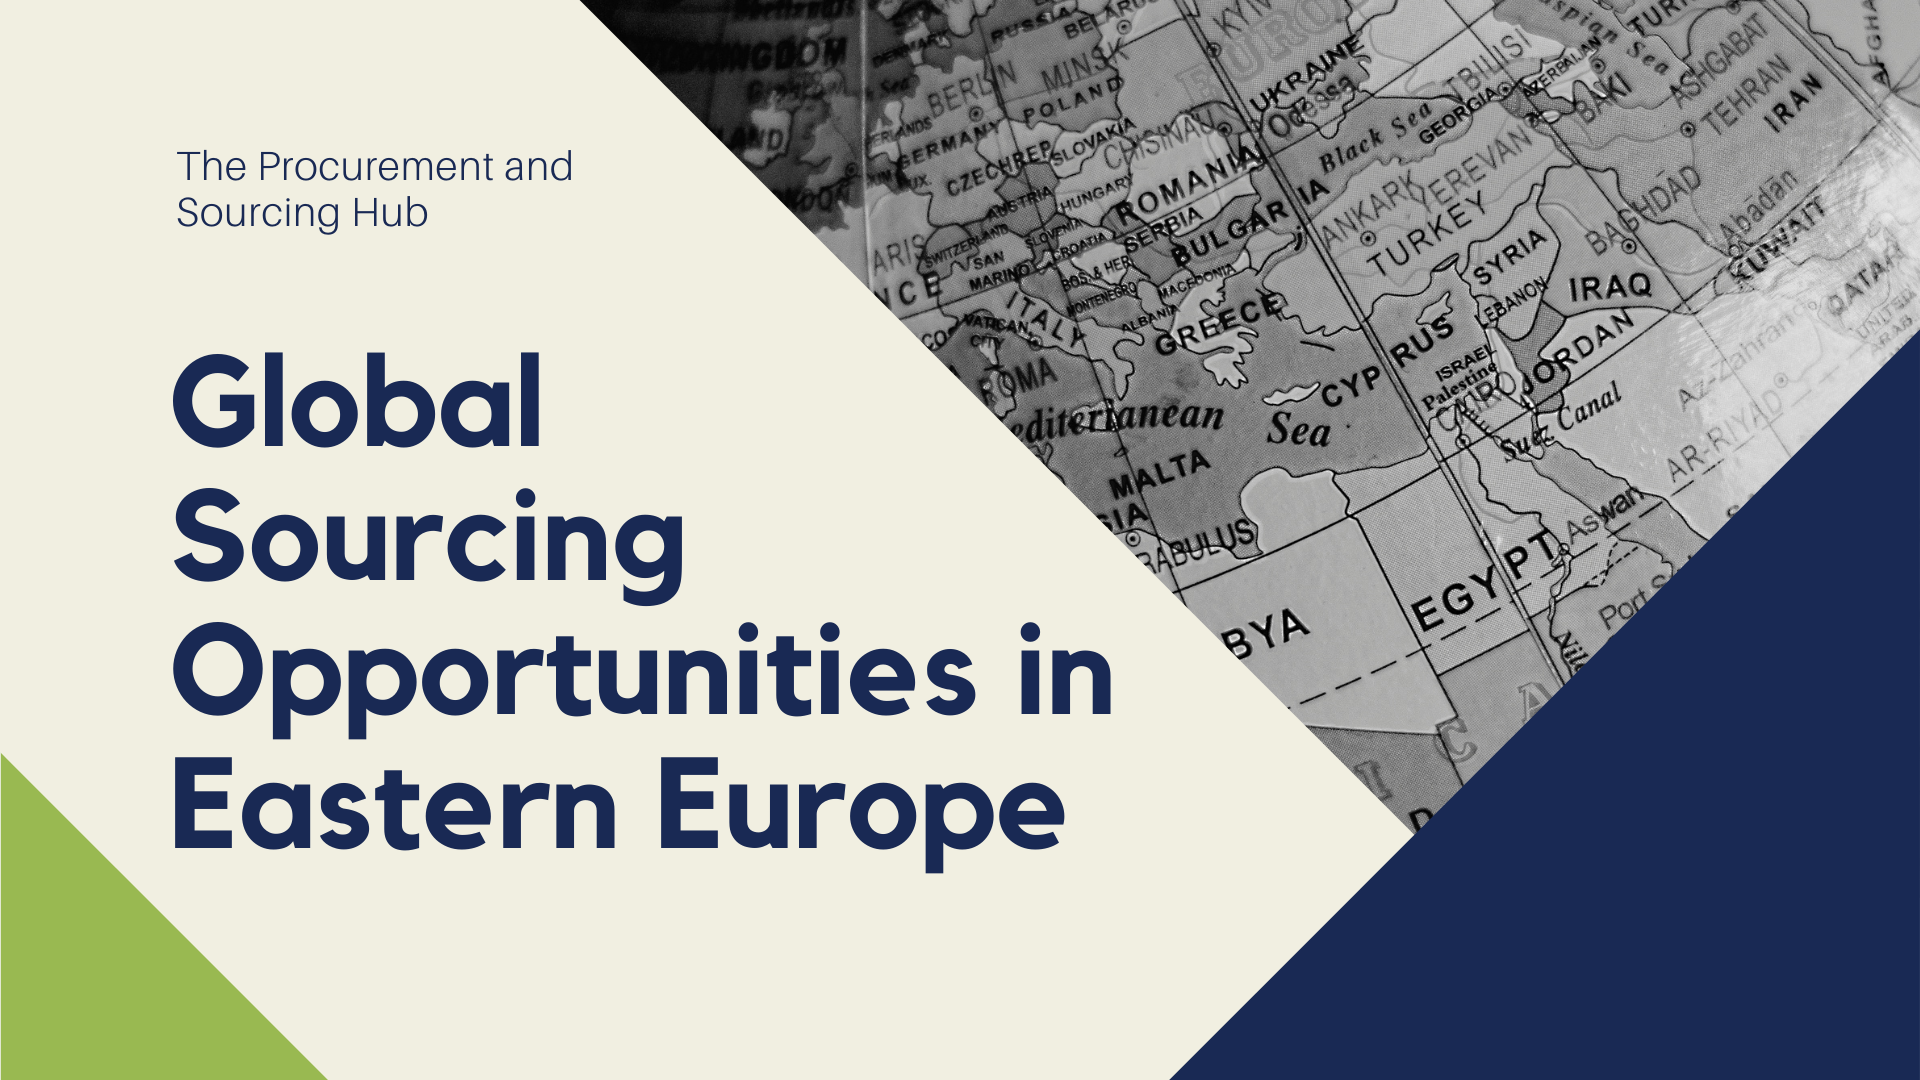 Global Sourcing Opportunities in Eastern Europe